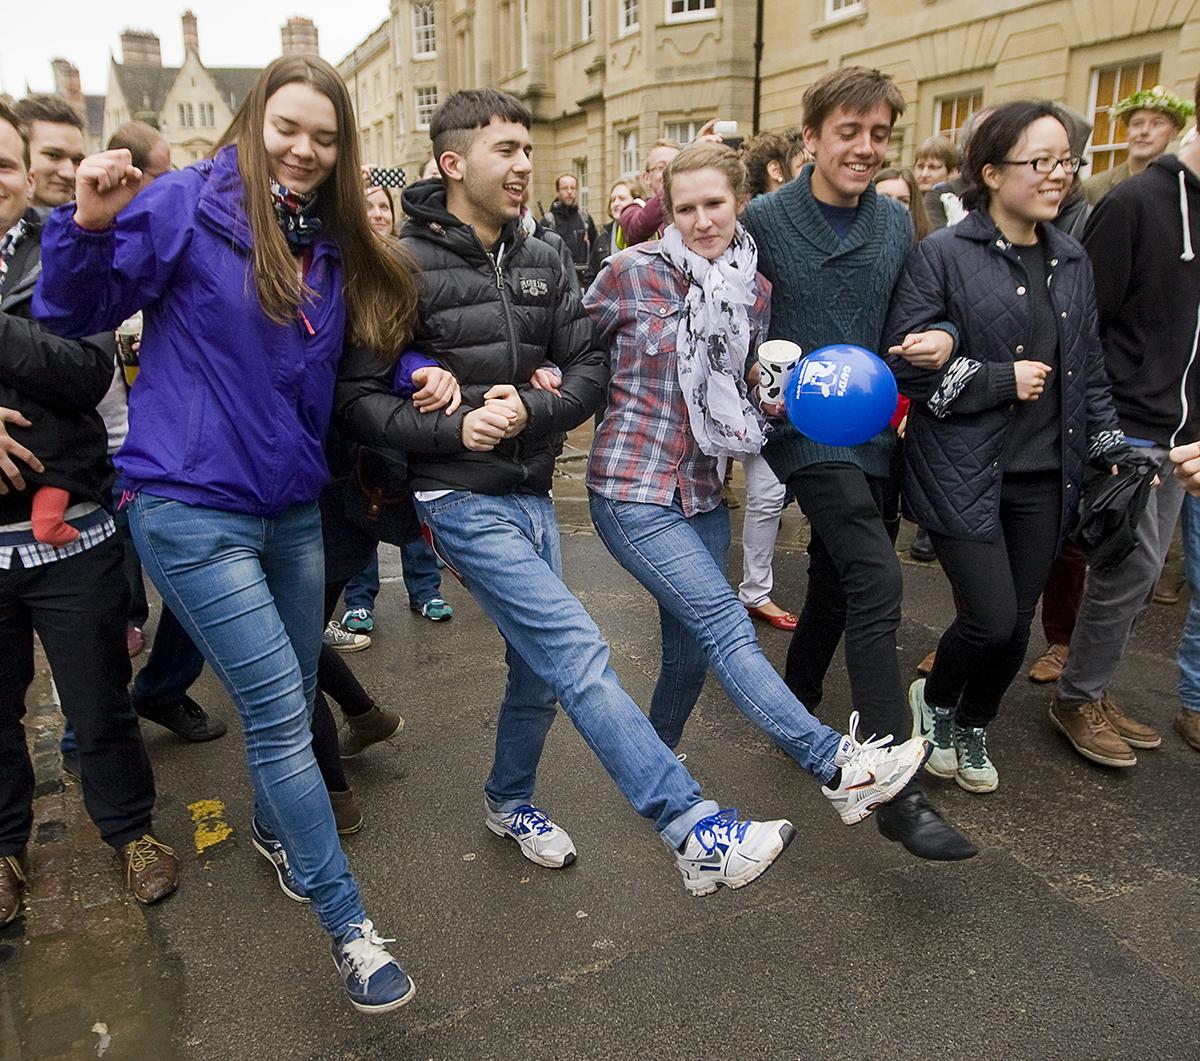 Pictures from the May Morning festivities in Oxford